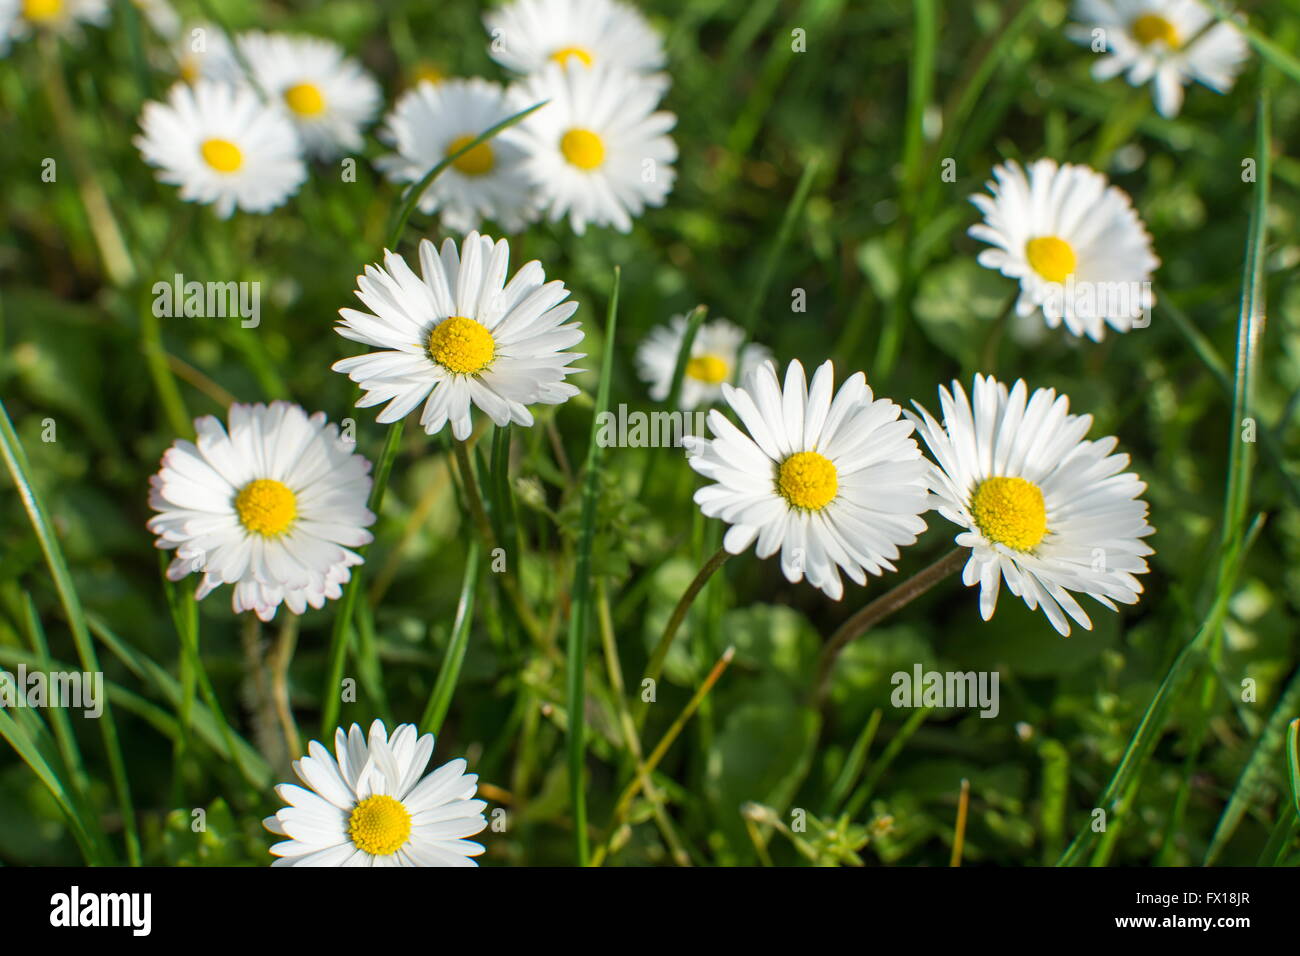 Daisies in the field with grass Stock Photo